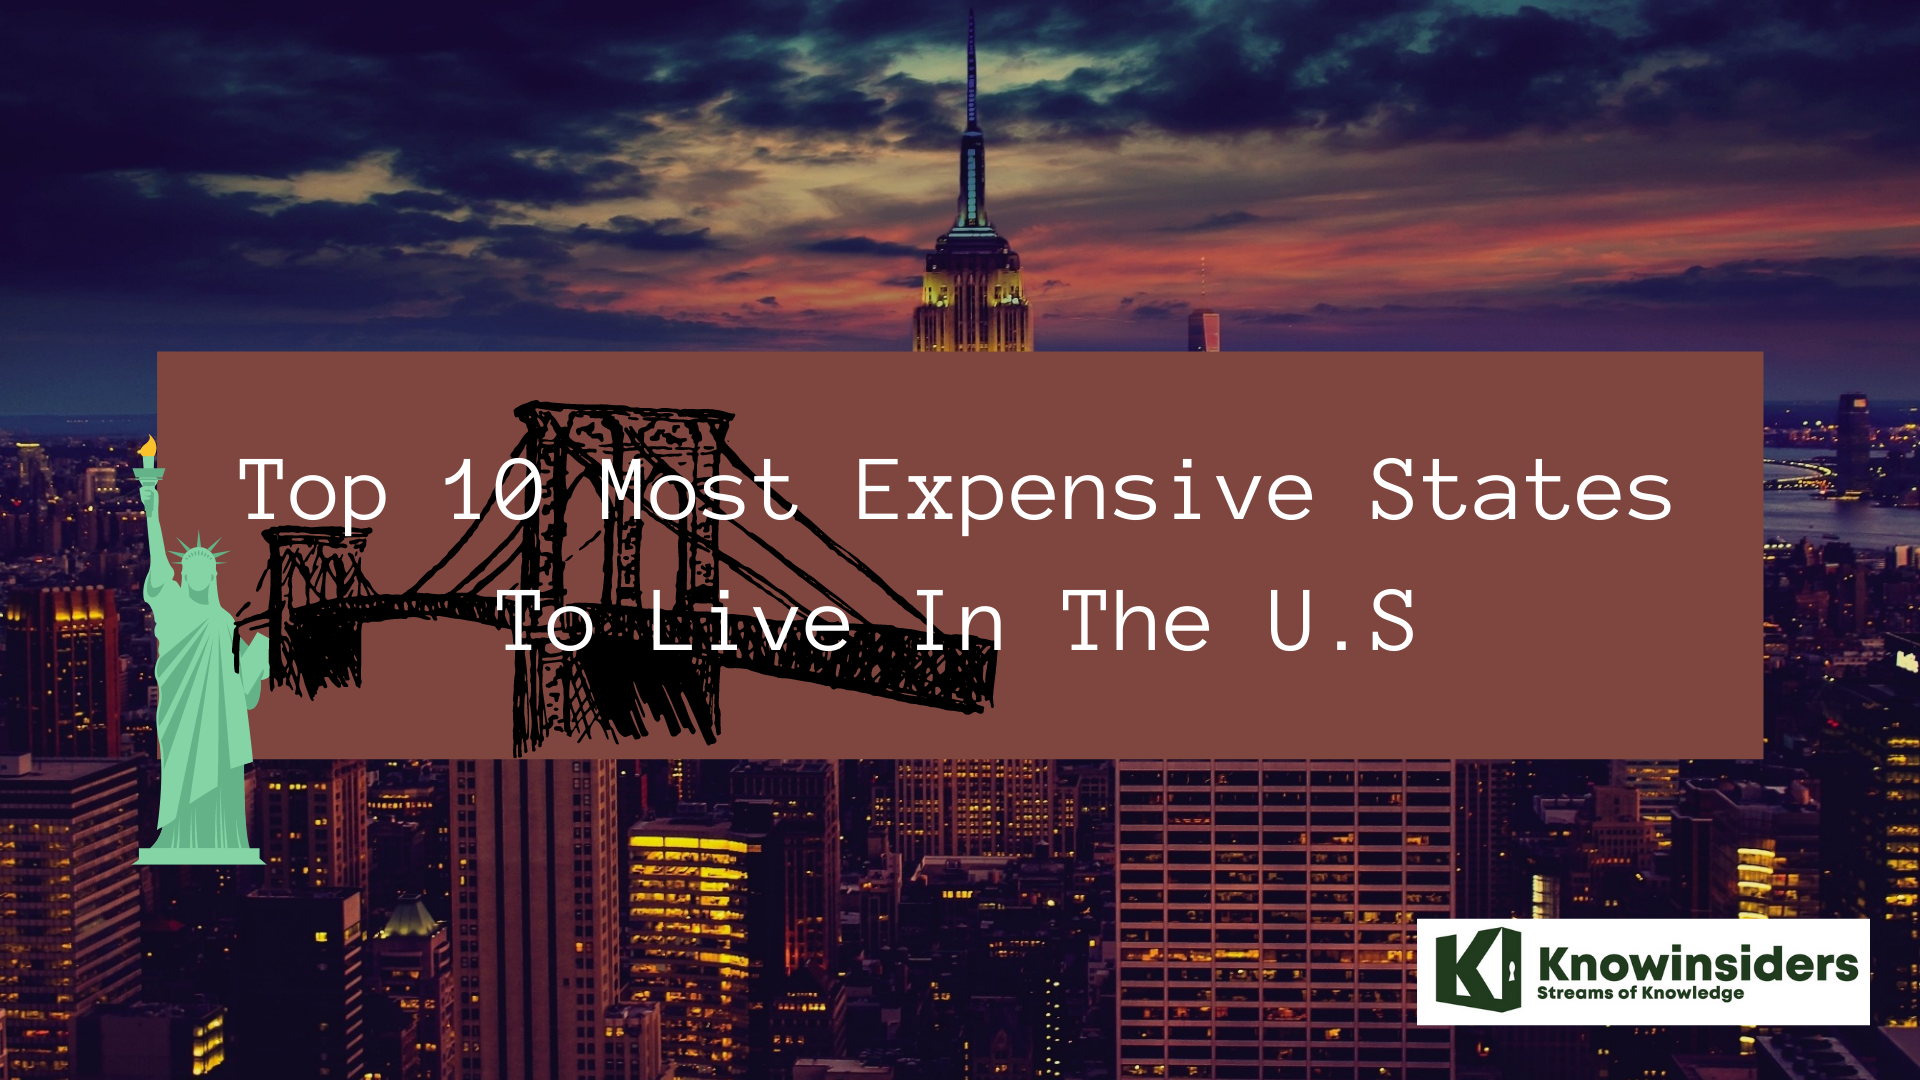 Top 10 Most Expensive States To Live In America Today